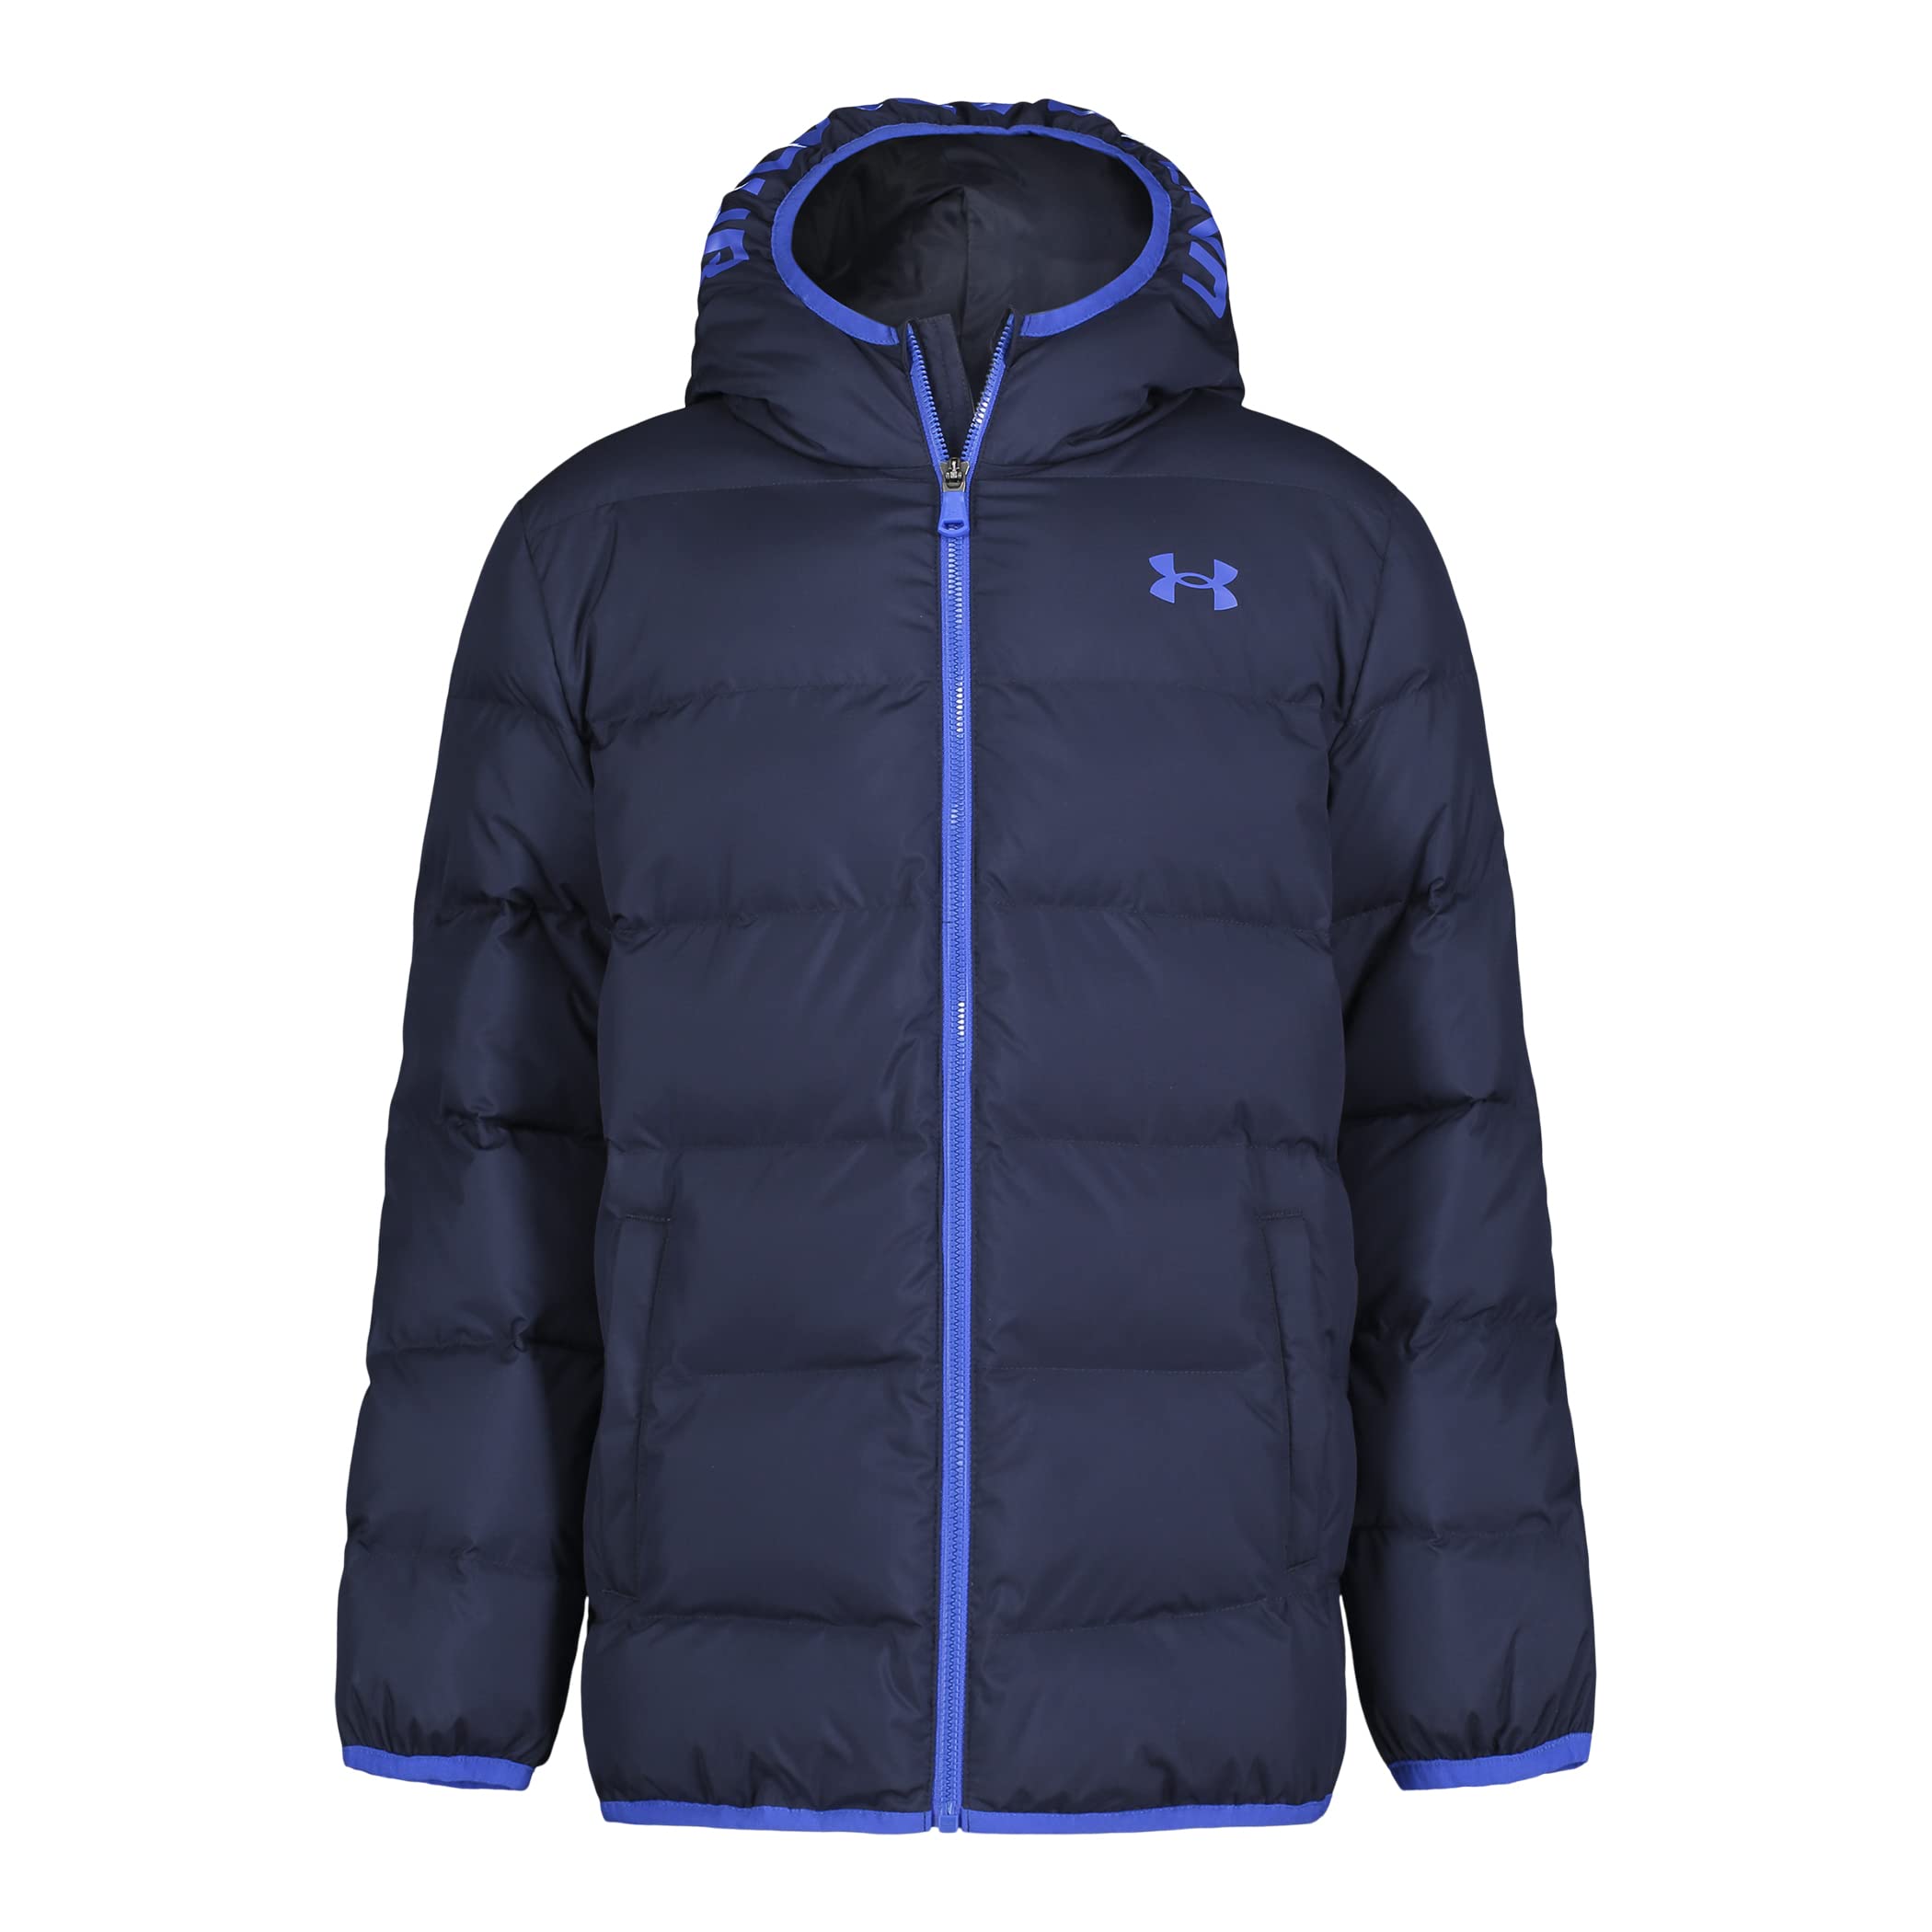 Under Armour Boys' Pronto Puffer Jacket, Mid-Weight, Zip Up Closure, Repels Water